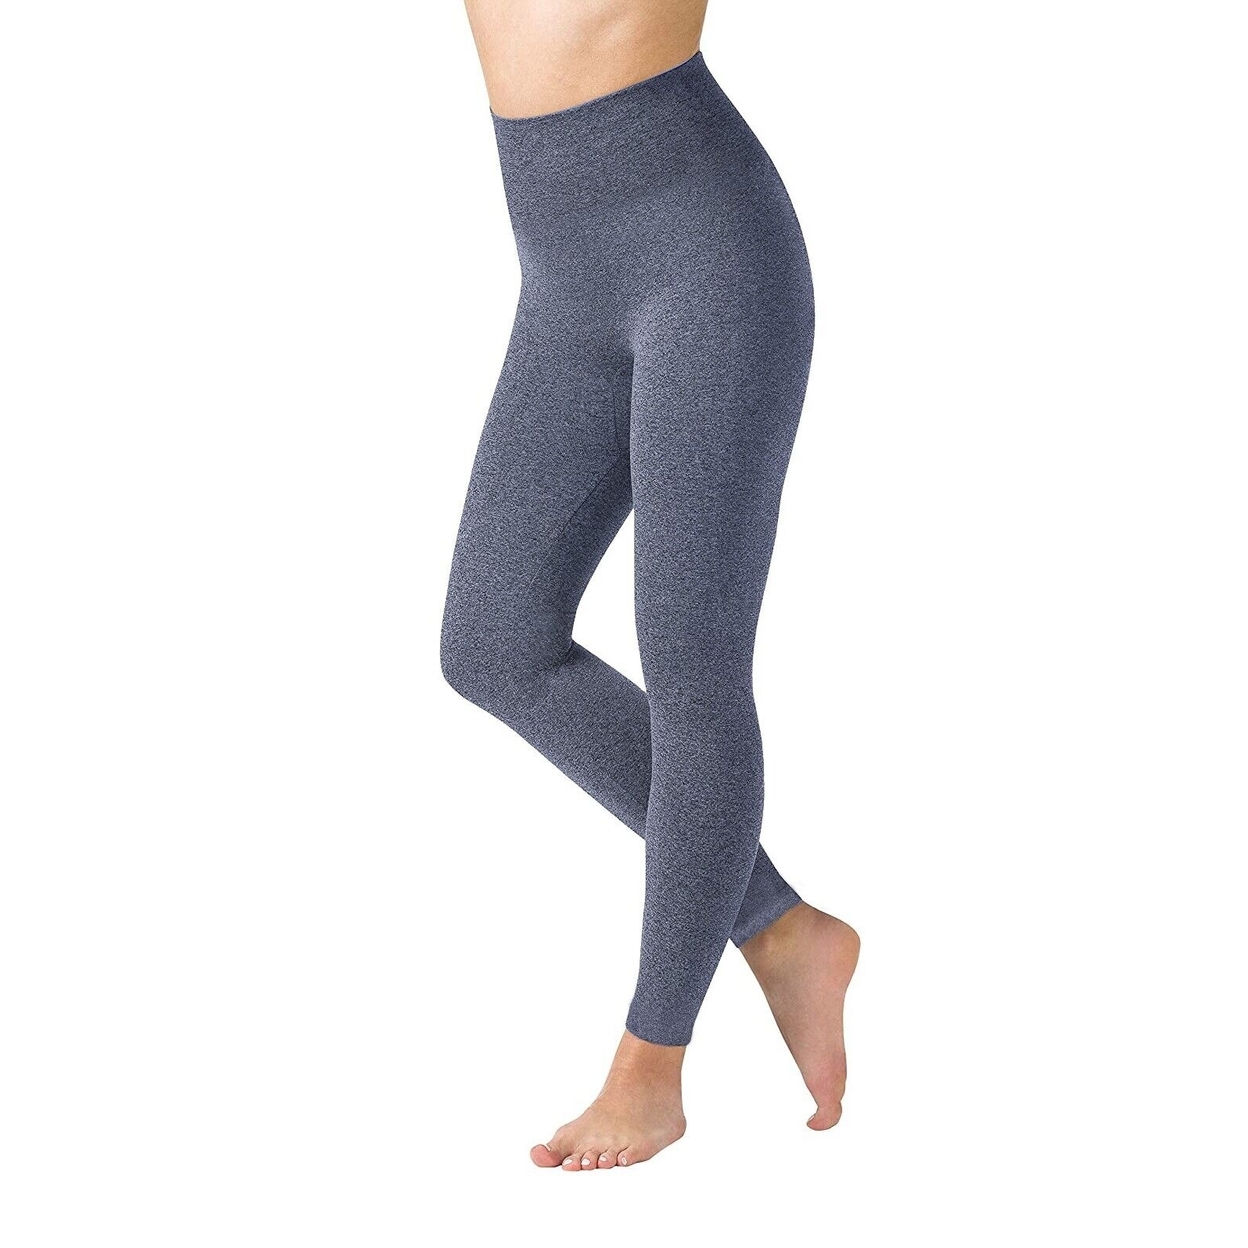 Multi-Packs Women High Waisted Fleece Lined Marled Leggings Ultra Soft Warm Pant - Charcoal/charcoal, 1, Small